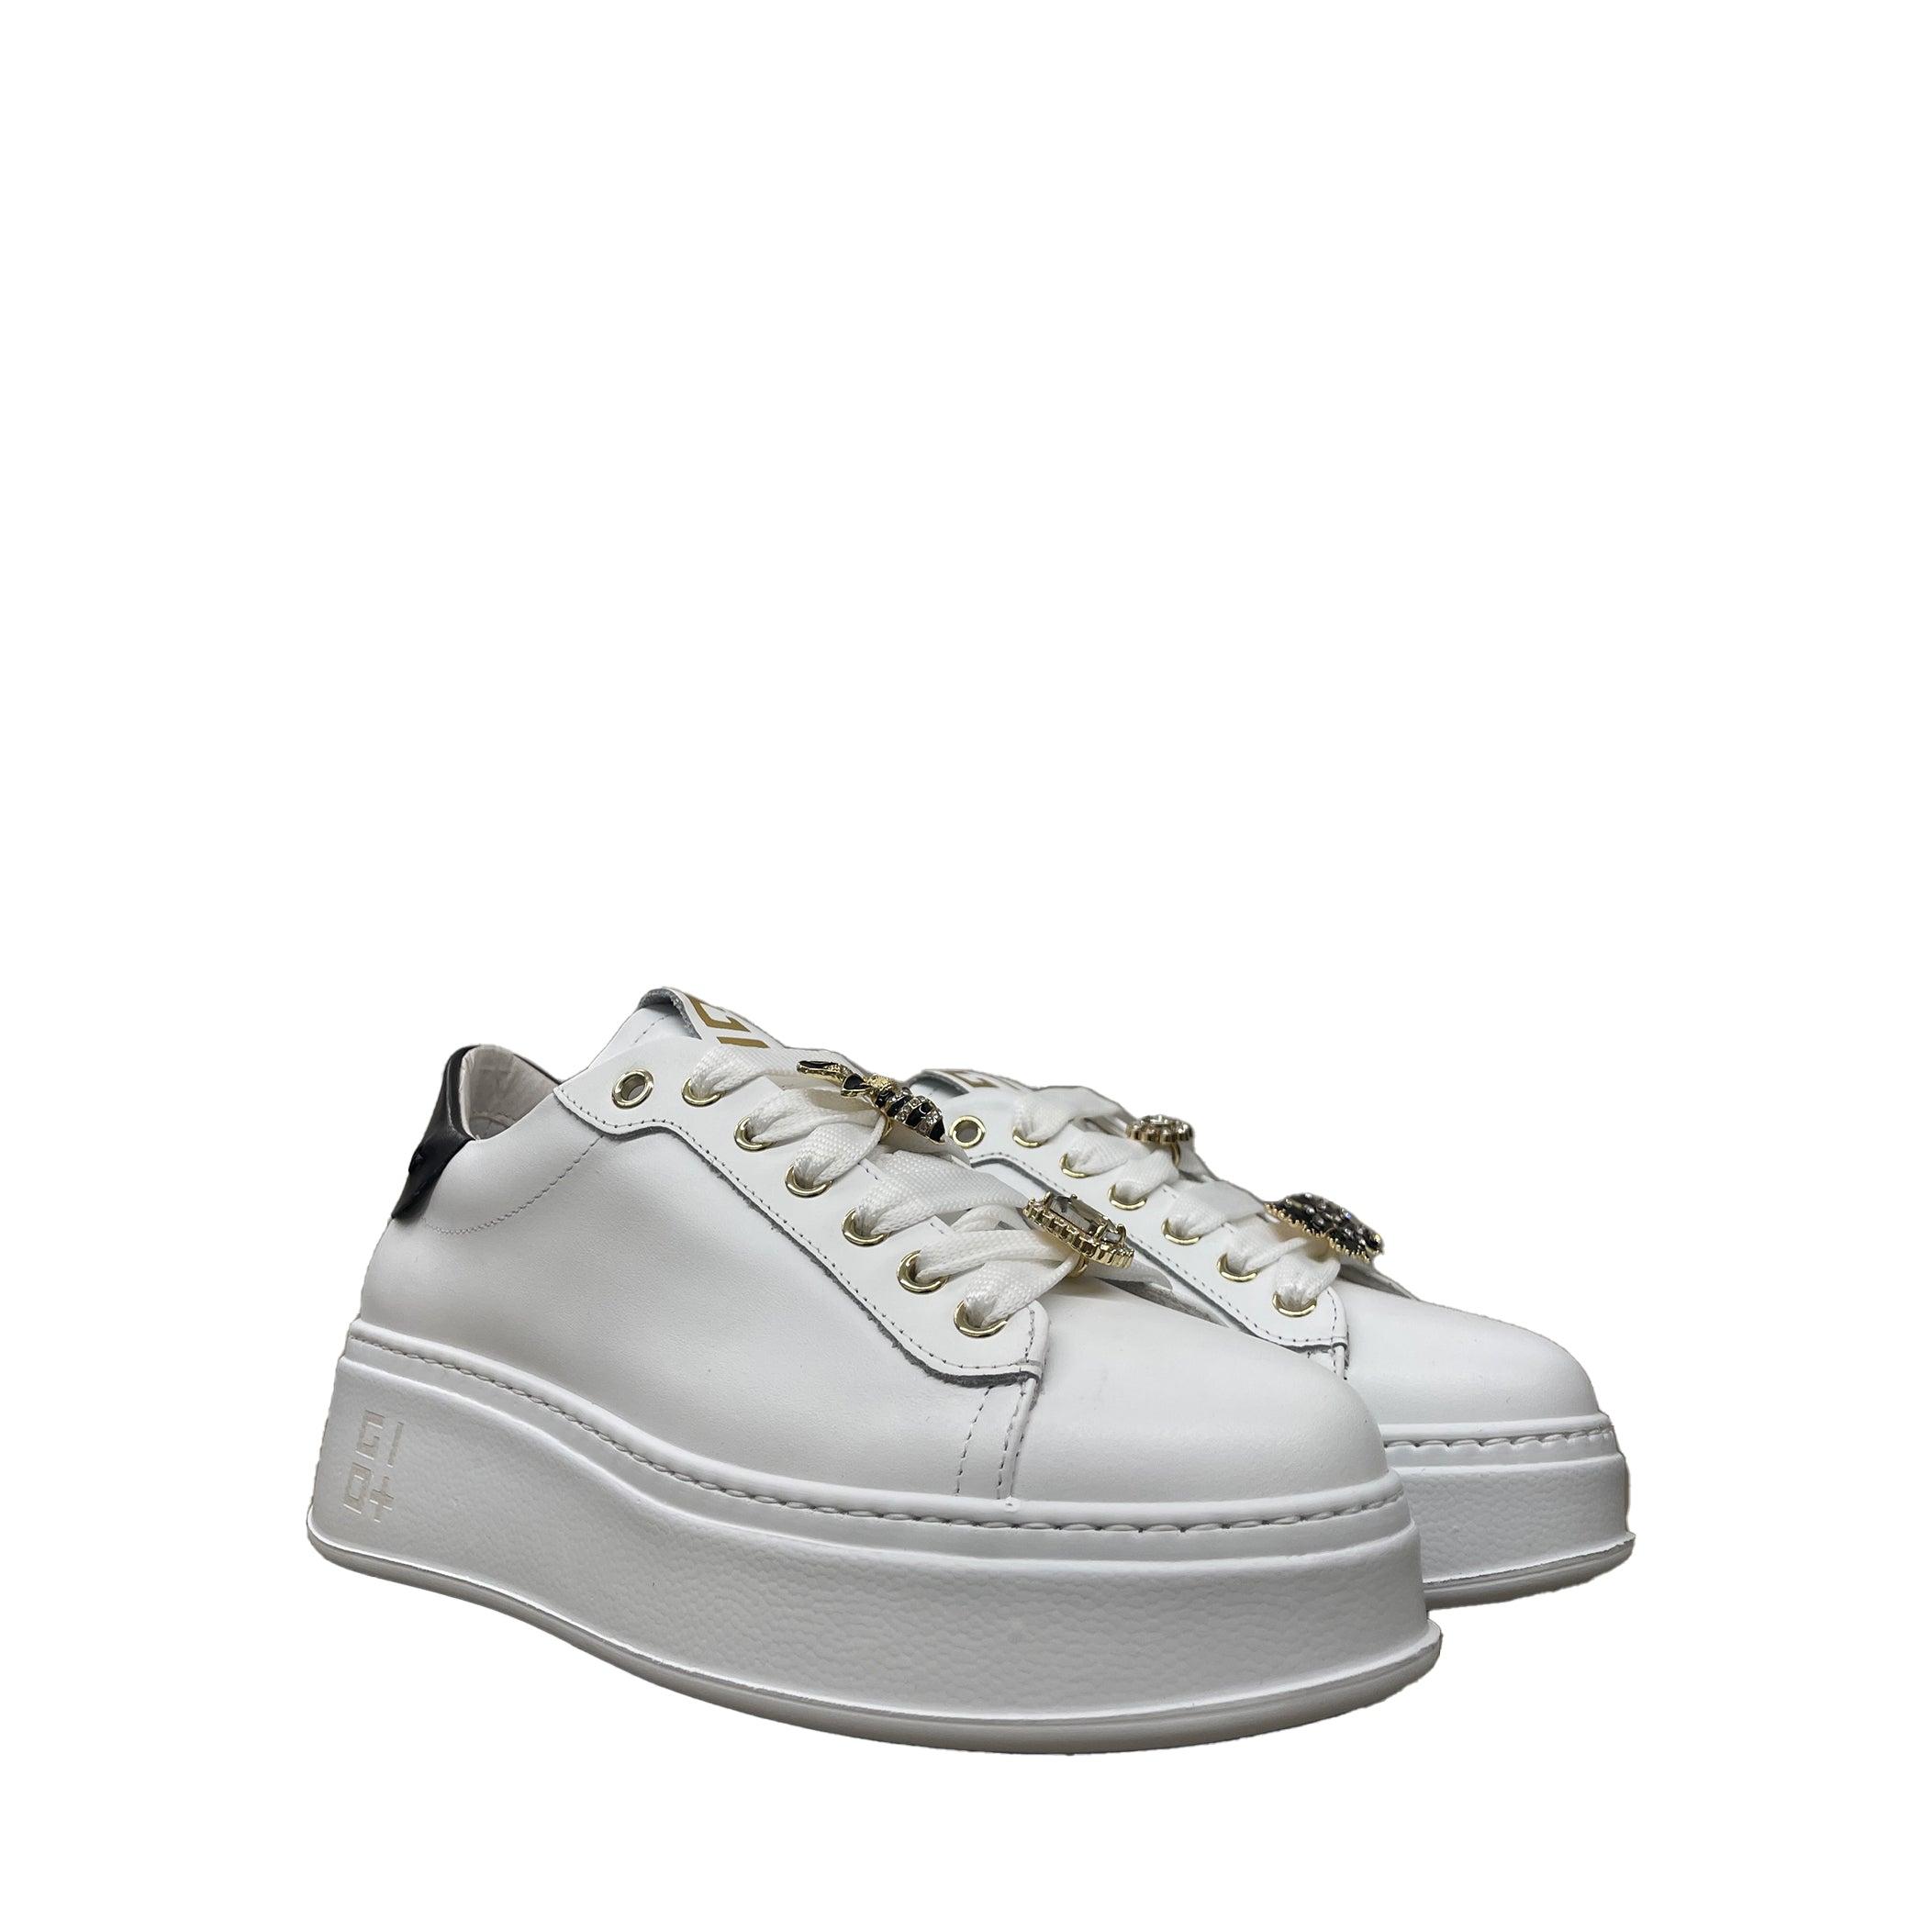 GIO+ Sneakers Con Gemme White/black | Lyst